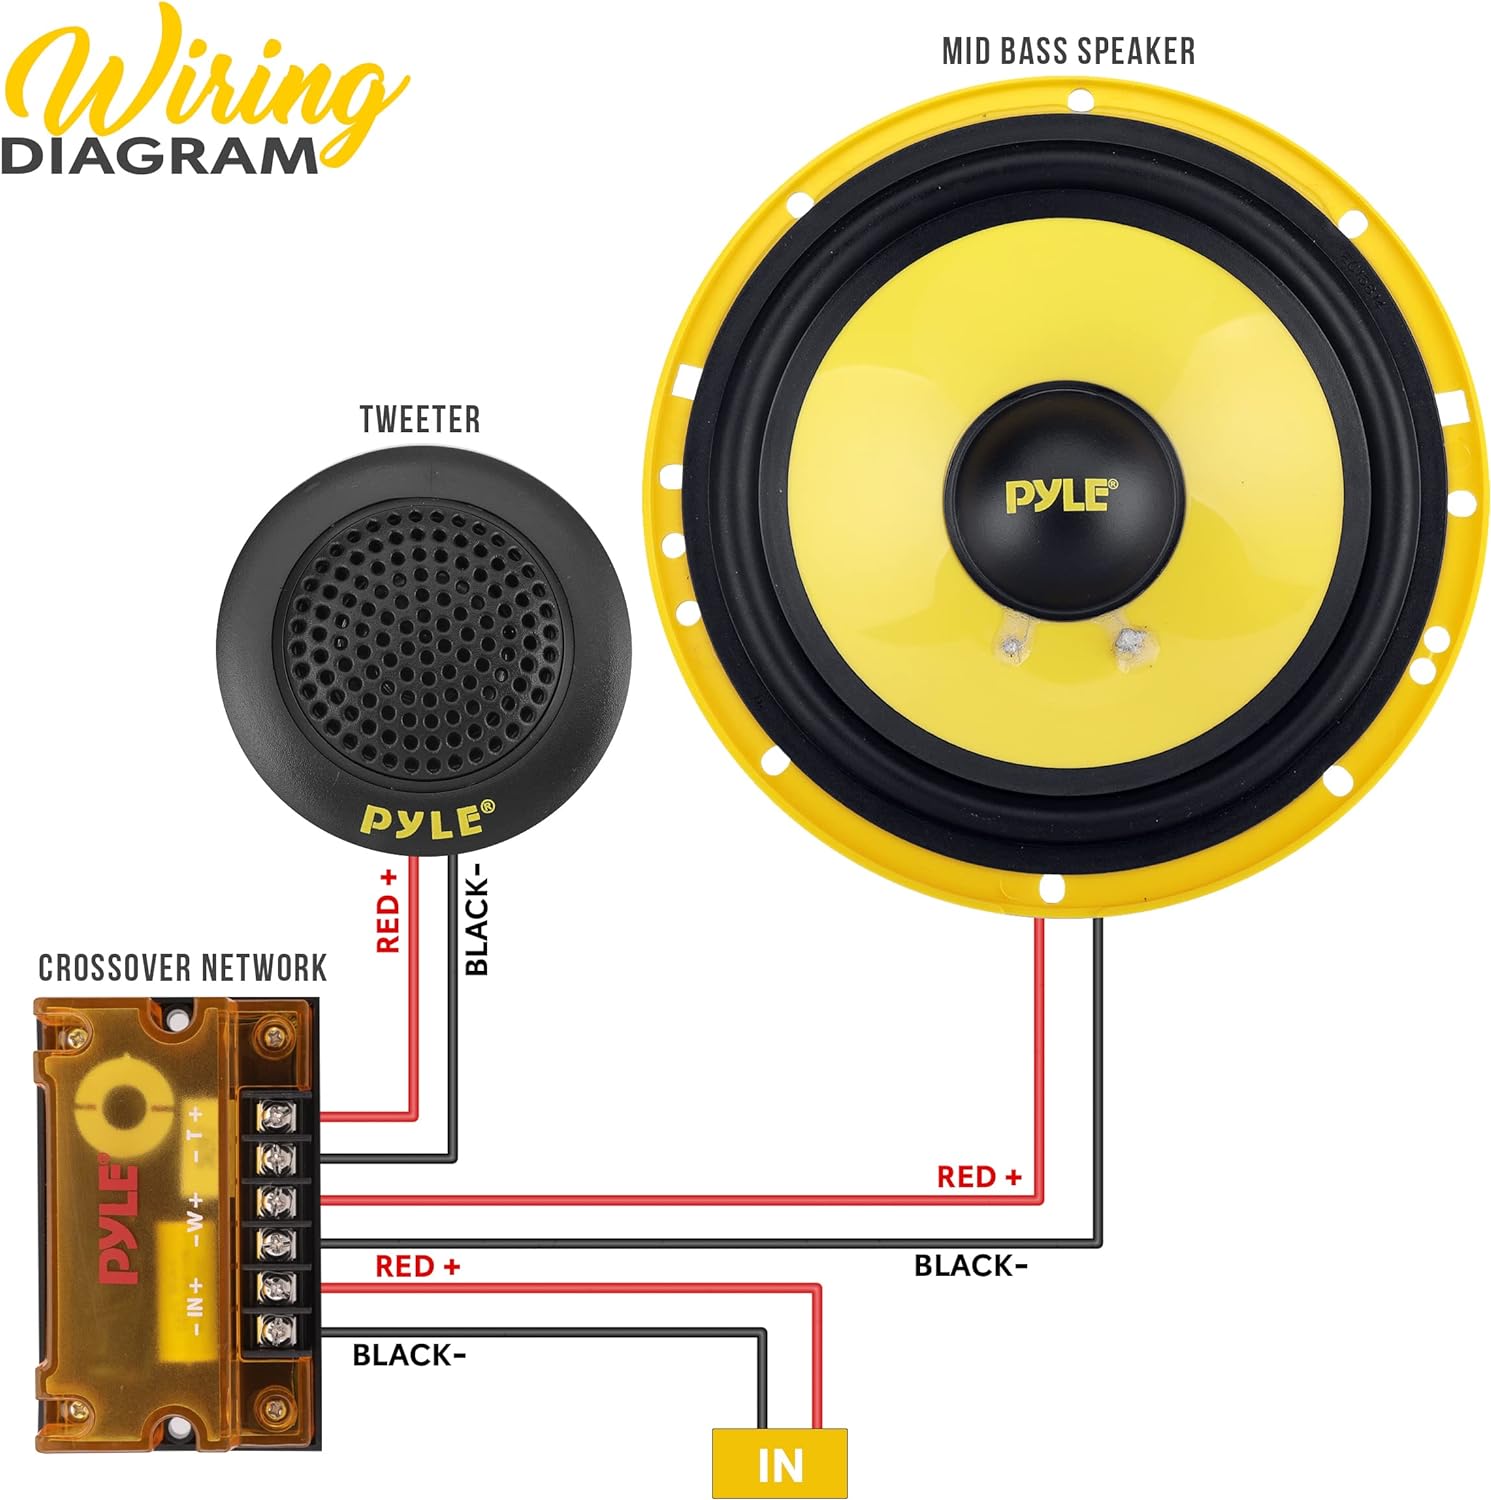 Pyle 2 Way Custom Component Speaker System - 6.5” 400 Watt, with Electroplated Plastic Basket, Butyl Rubber Surround & 40 Oz Magnet Structure - Wire Installation Hardware Set Included - PLG6C, Yellow